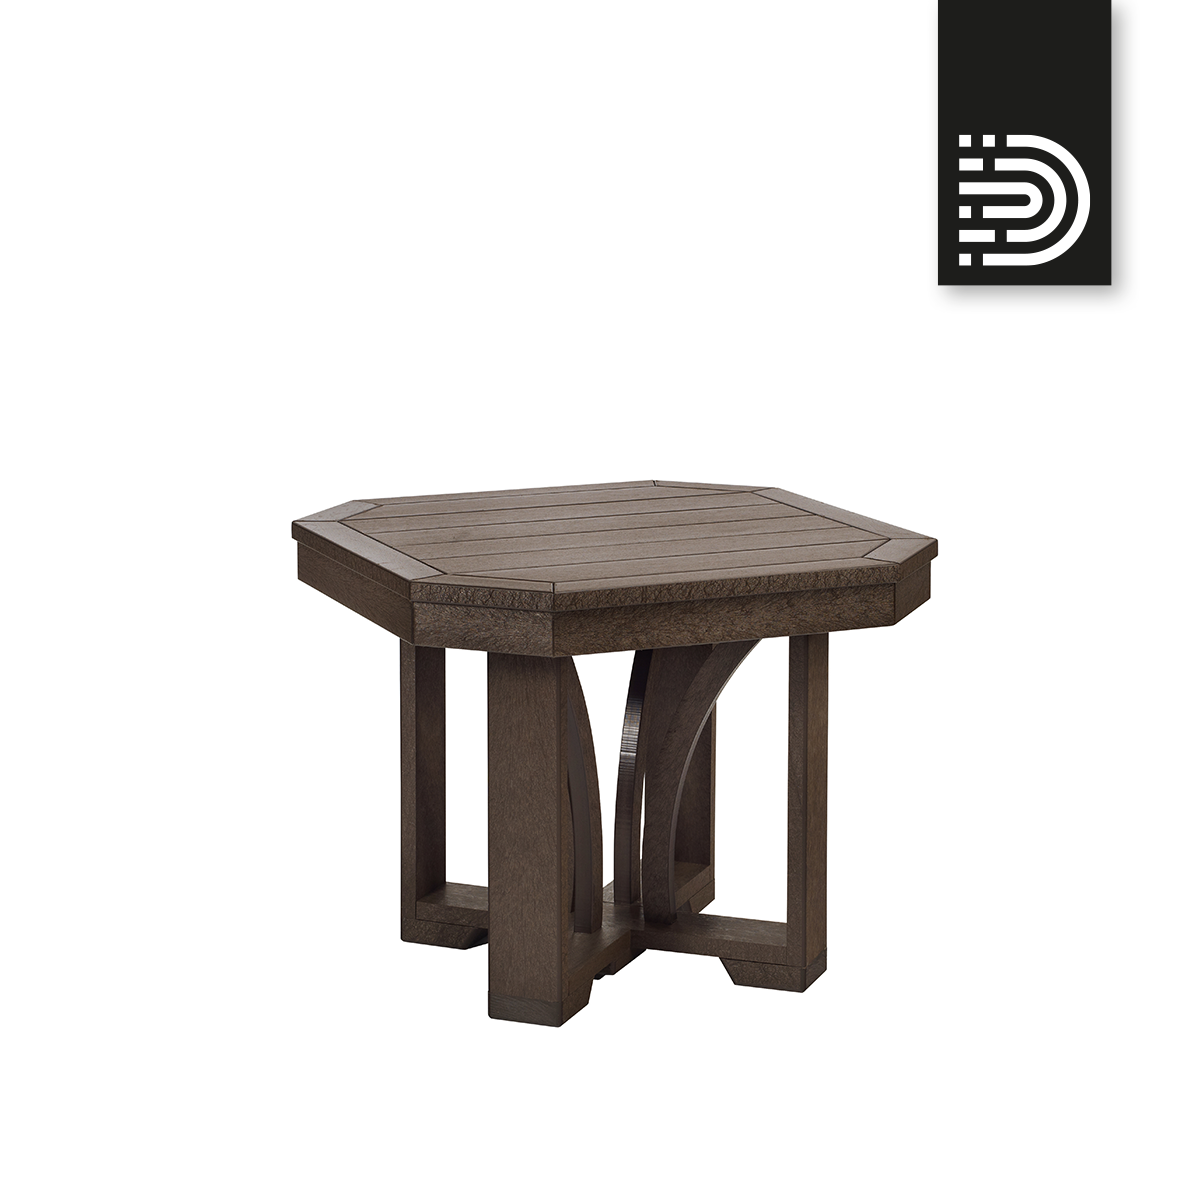 T31 Square End Table  - chocolate 16